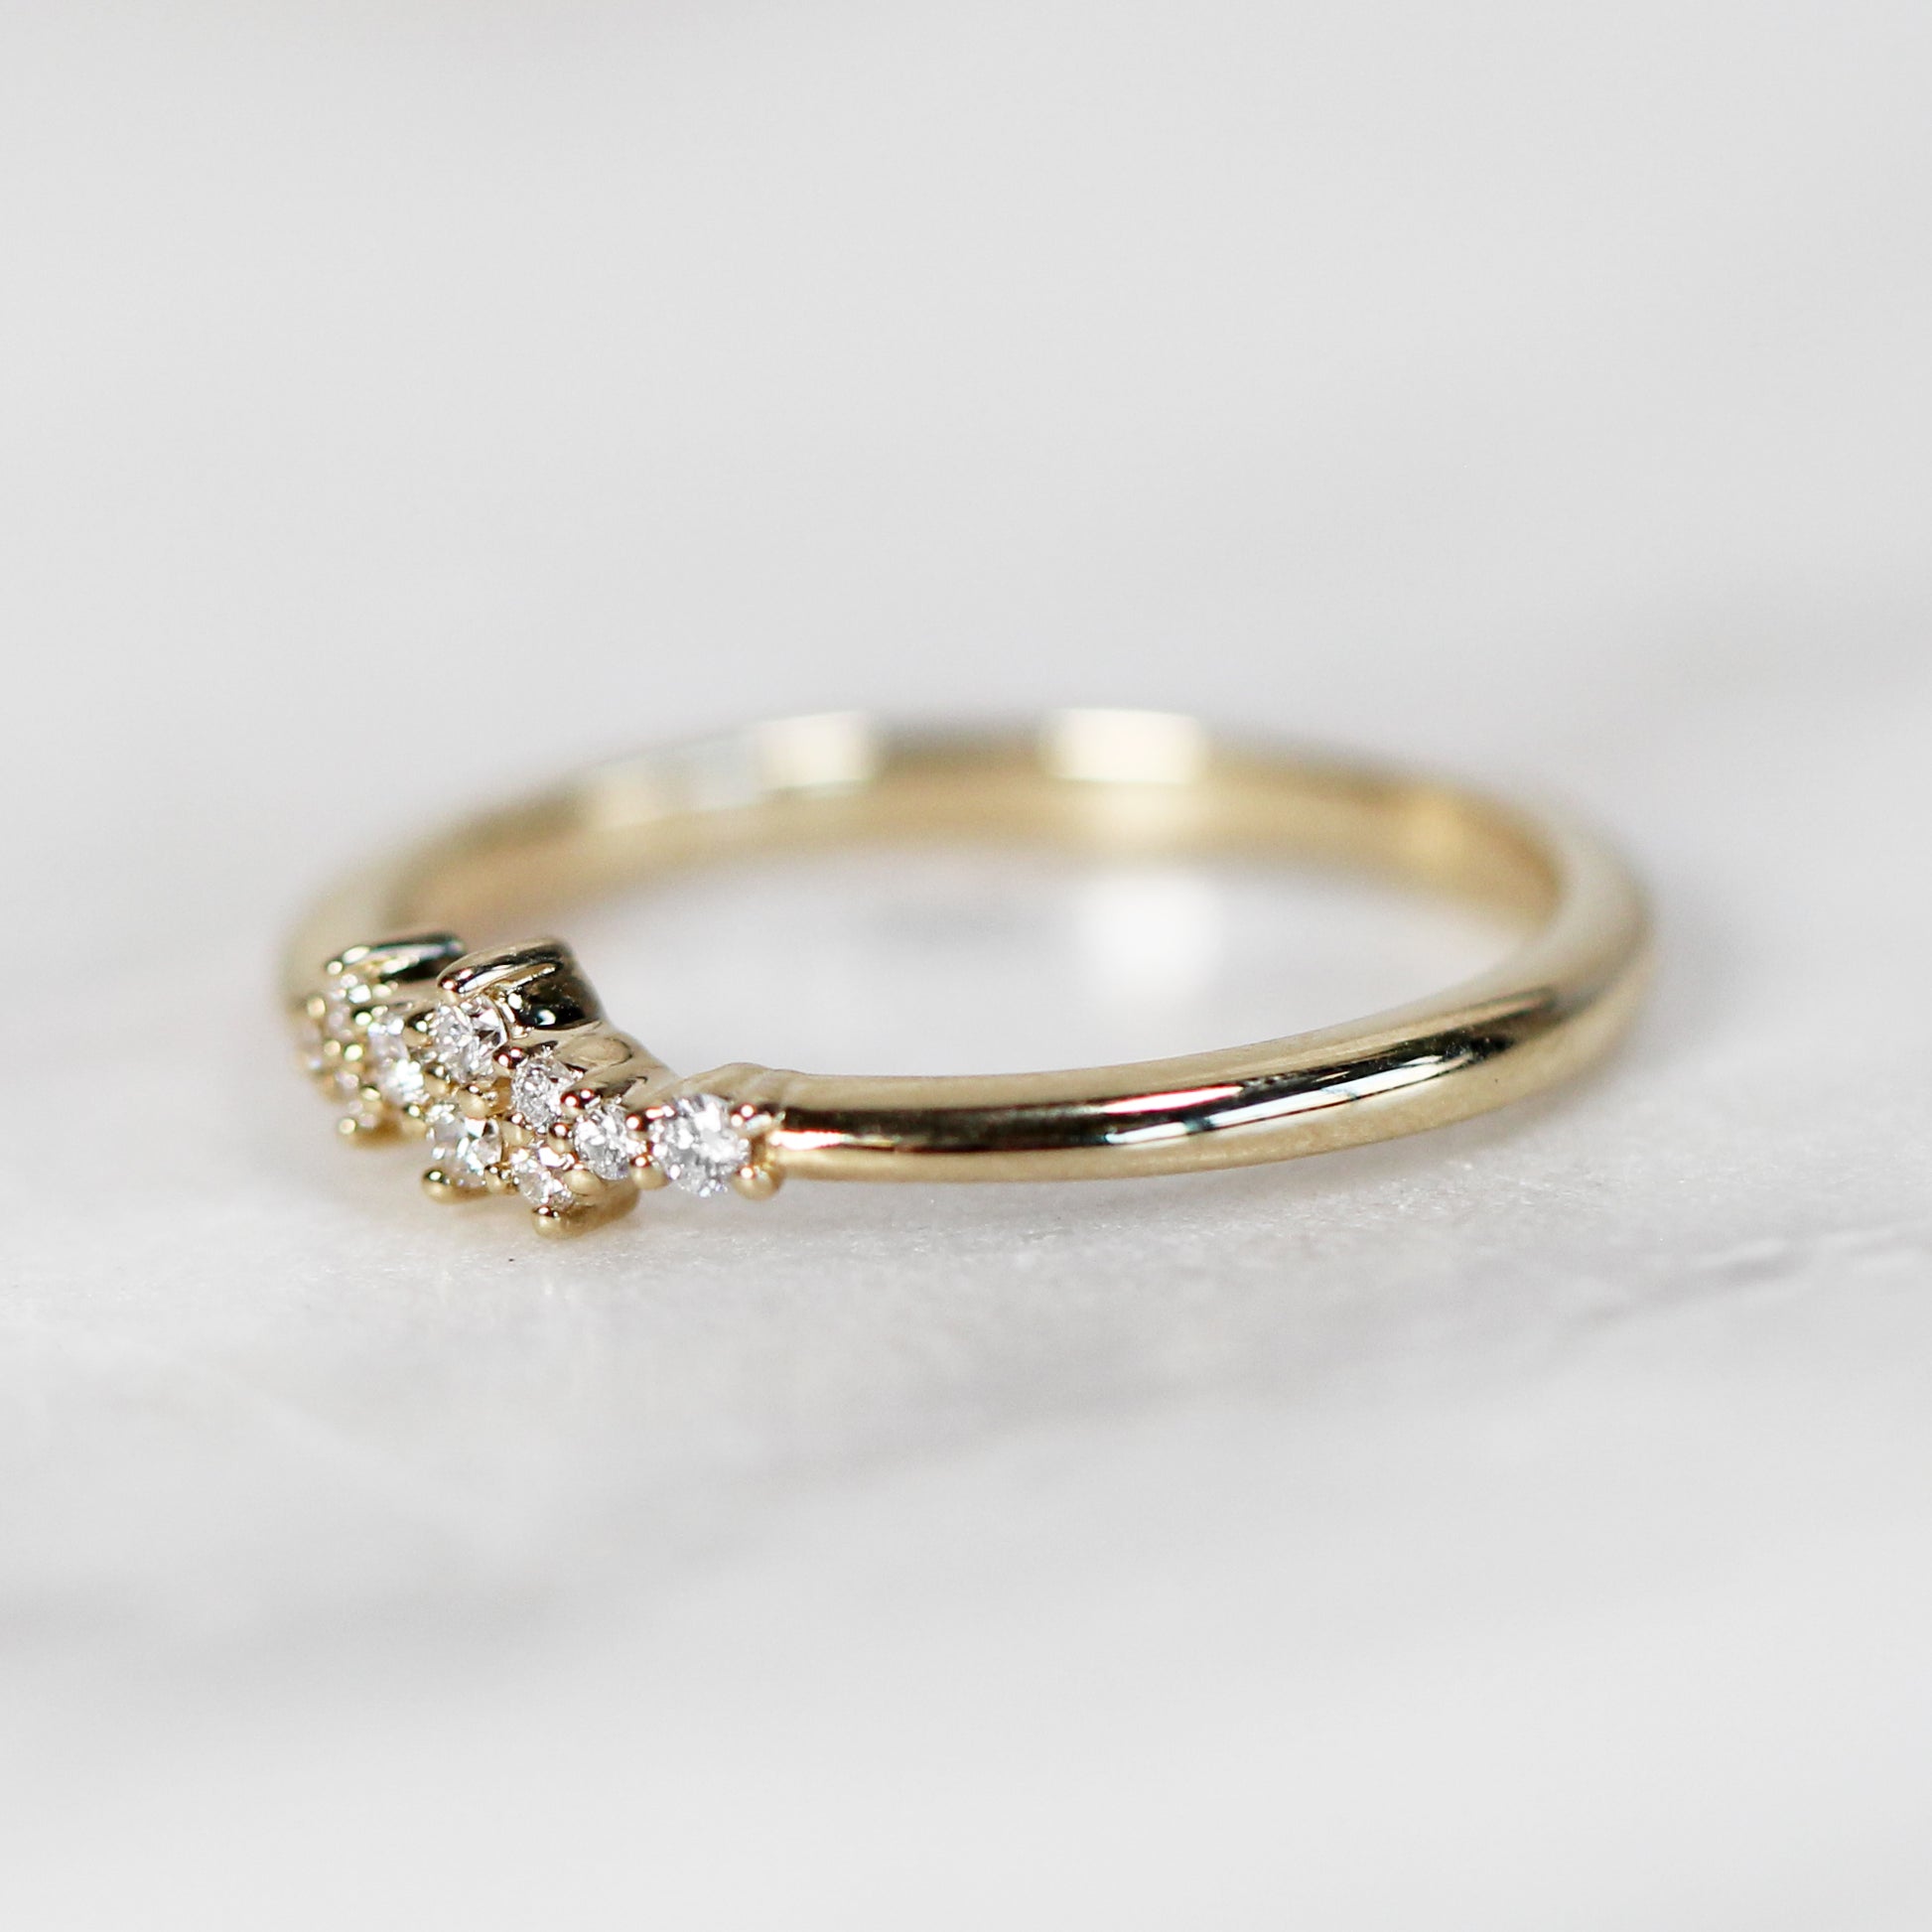 Fiona - Cluster style diamond band - Midwinter Co. Alternative Bridal Rings and Modern Fine Jewelry